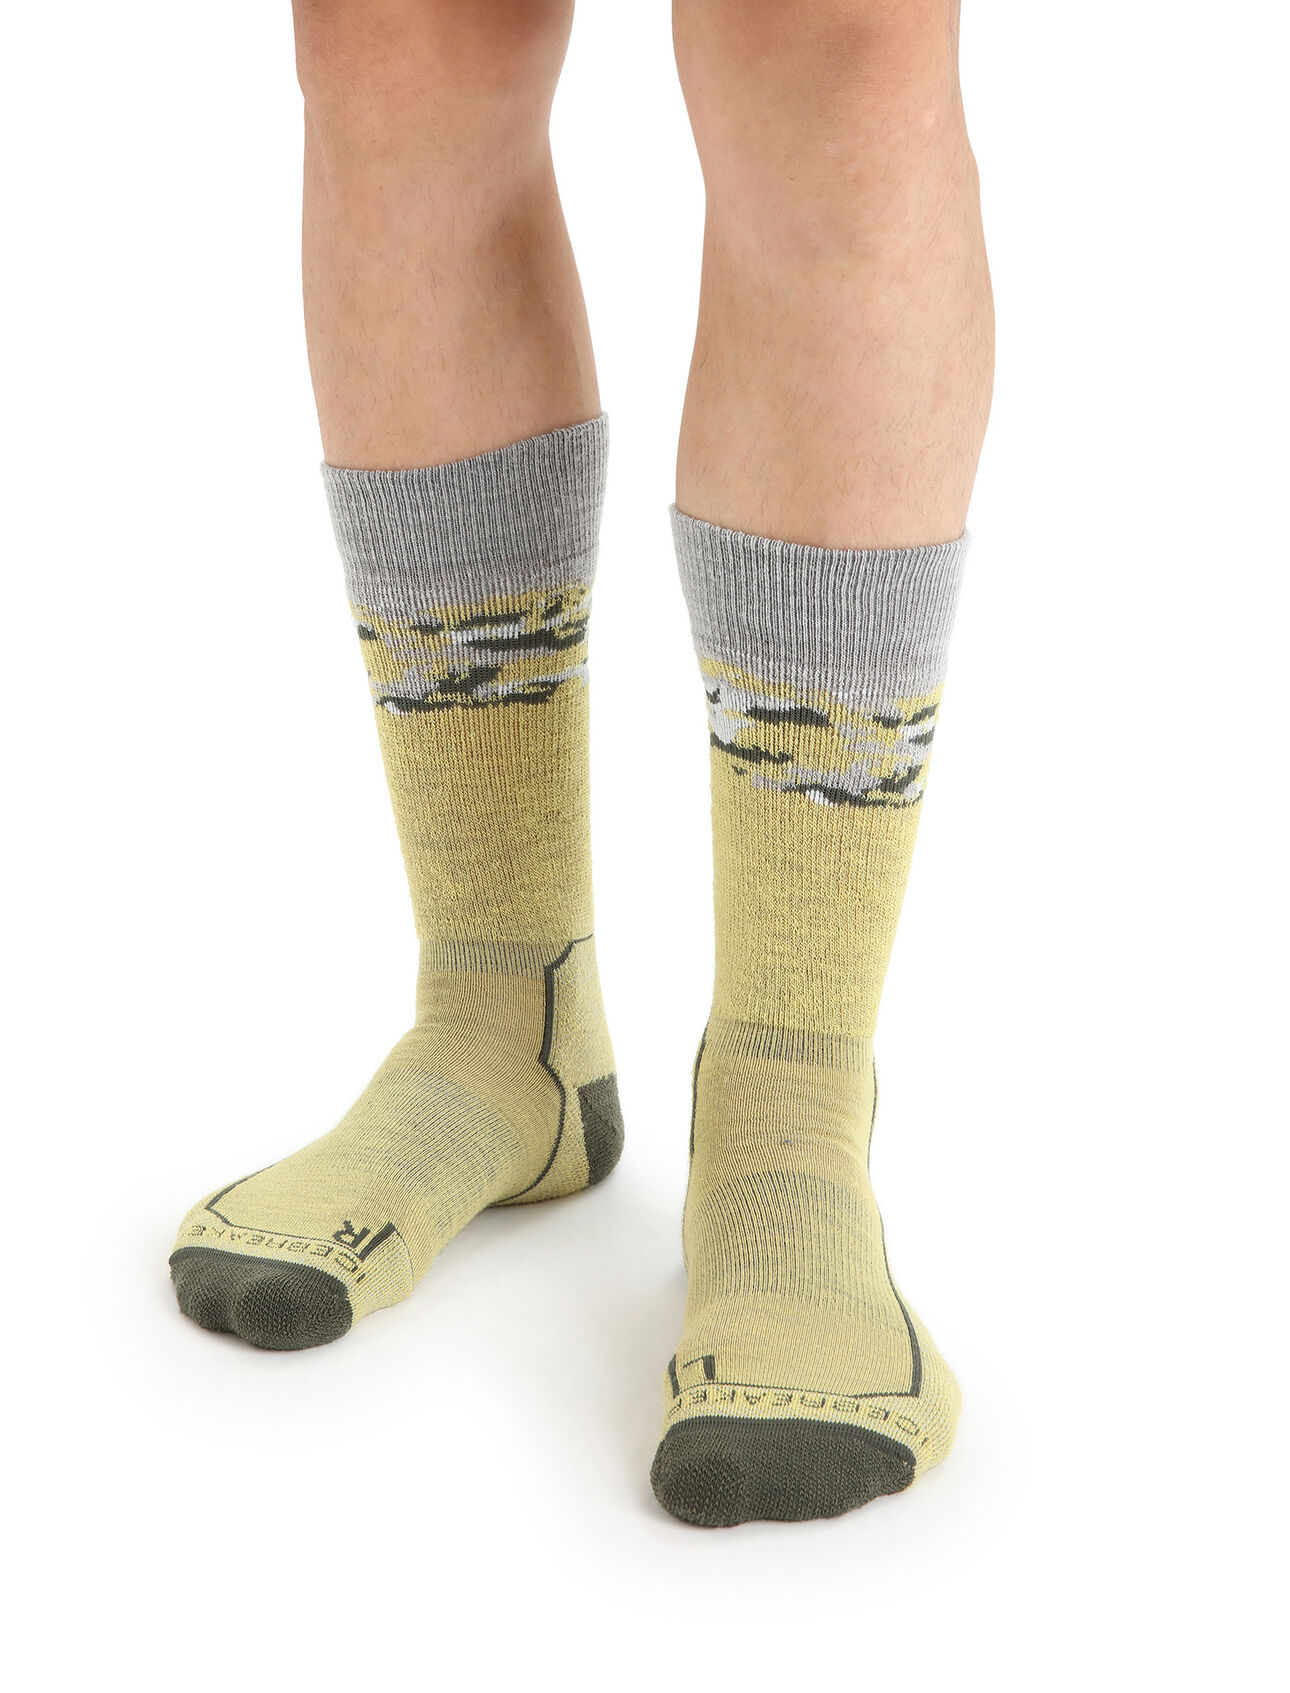 Mens Merino Hike+ Medium Crew Socks Sedimentary Durable, crew-length merino wool socks that are stretchy, breathable, and naturally odor-resistant with full cushion, the Hike+ Medium Crew Sedimentary socks feature an anatomical sculpted design for day hikes and backpacking trips.